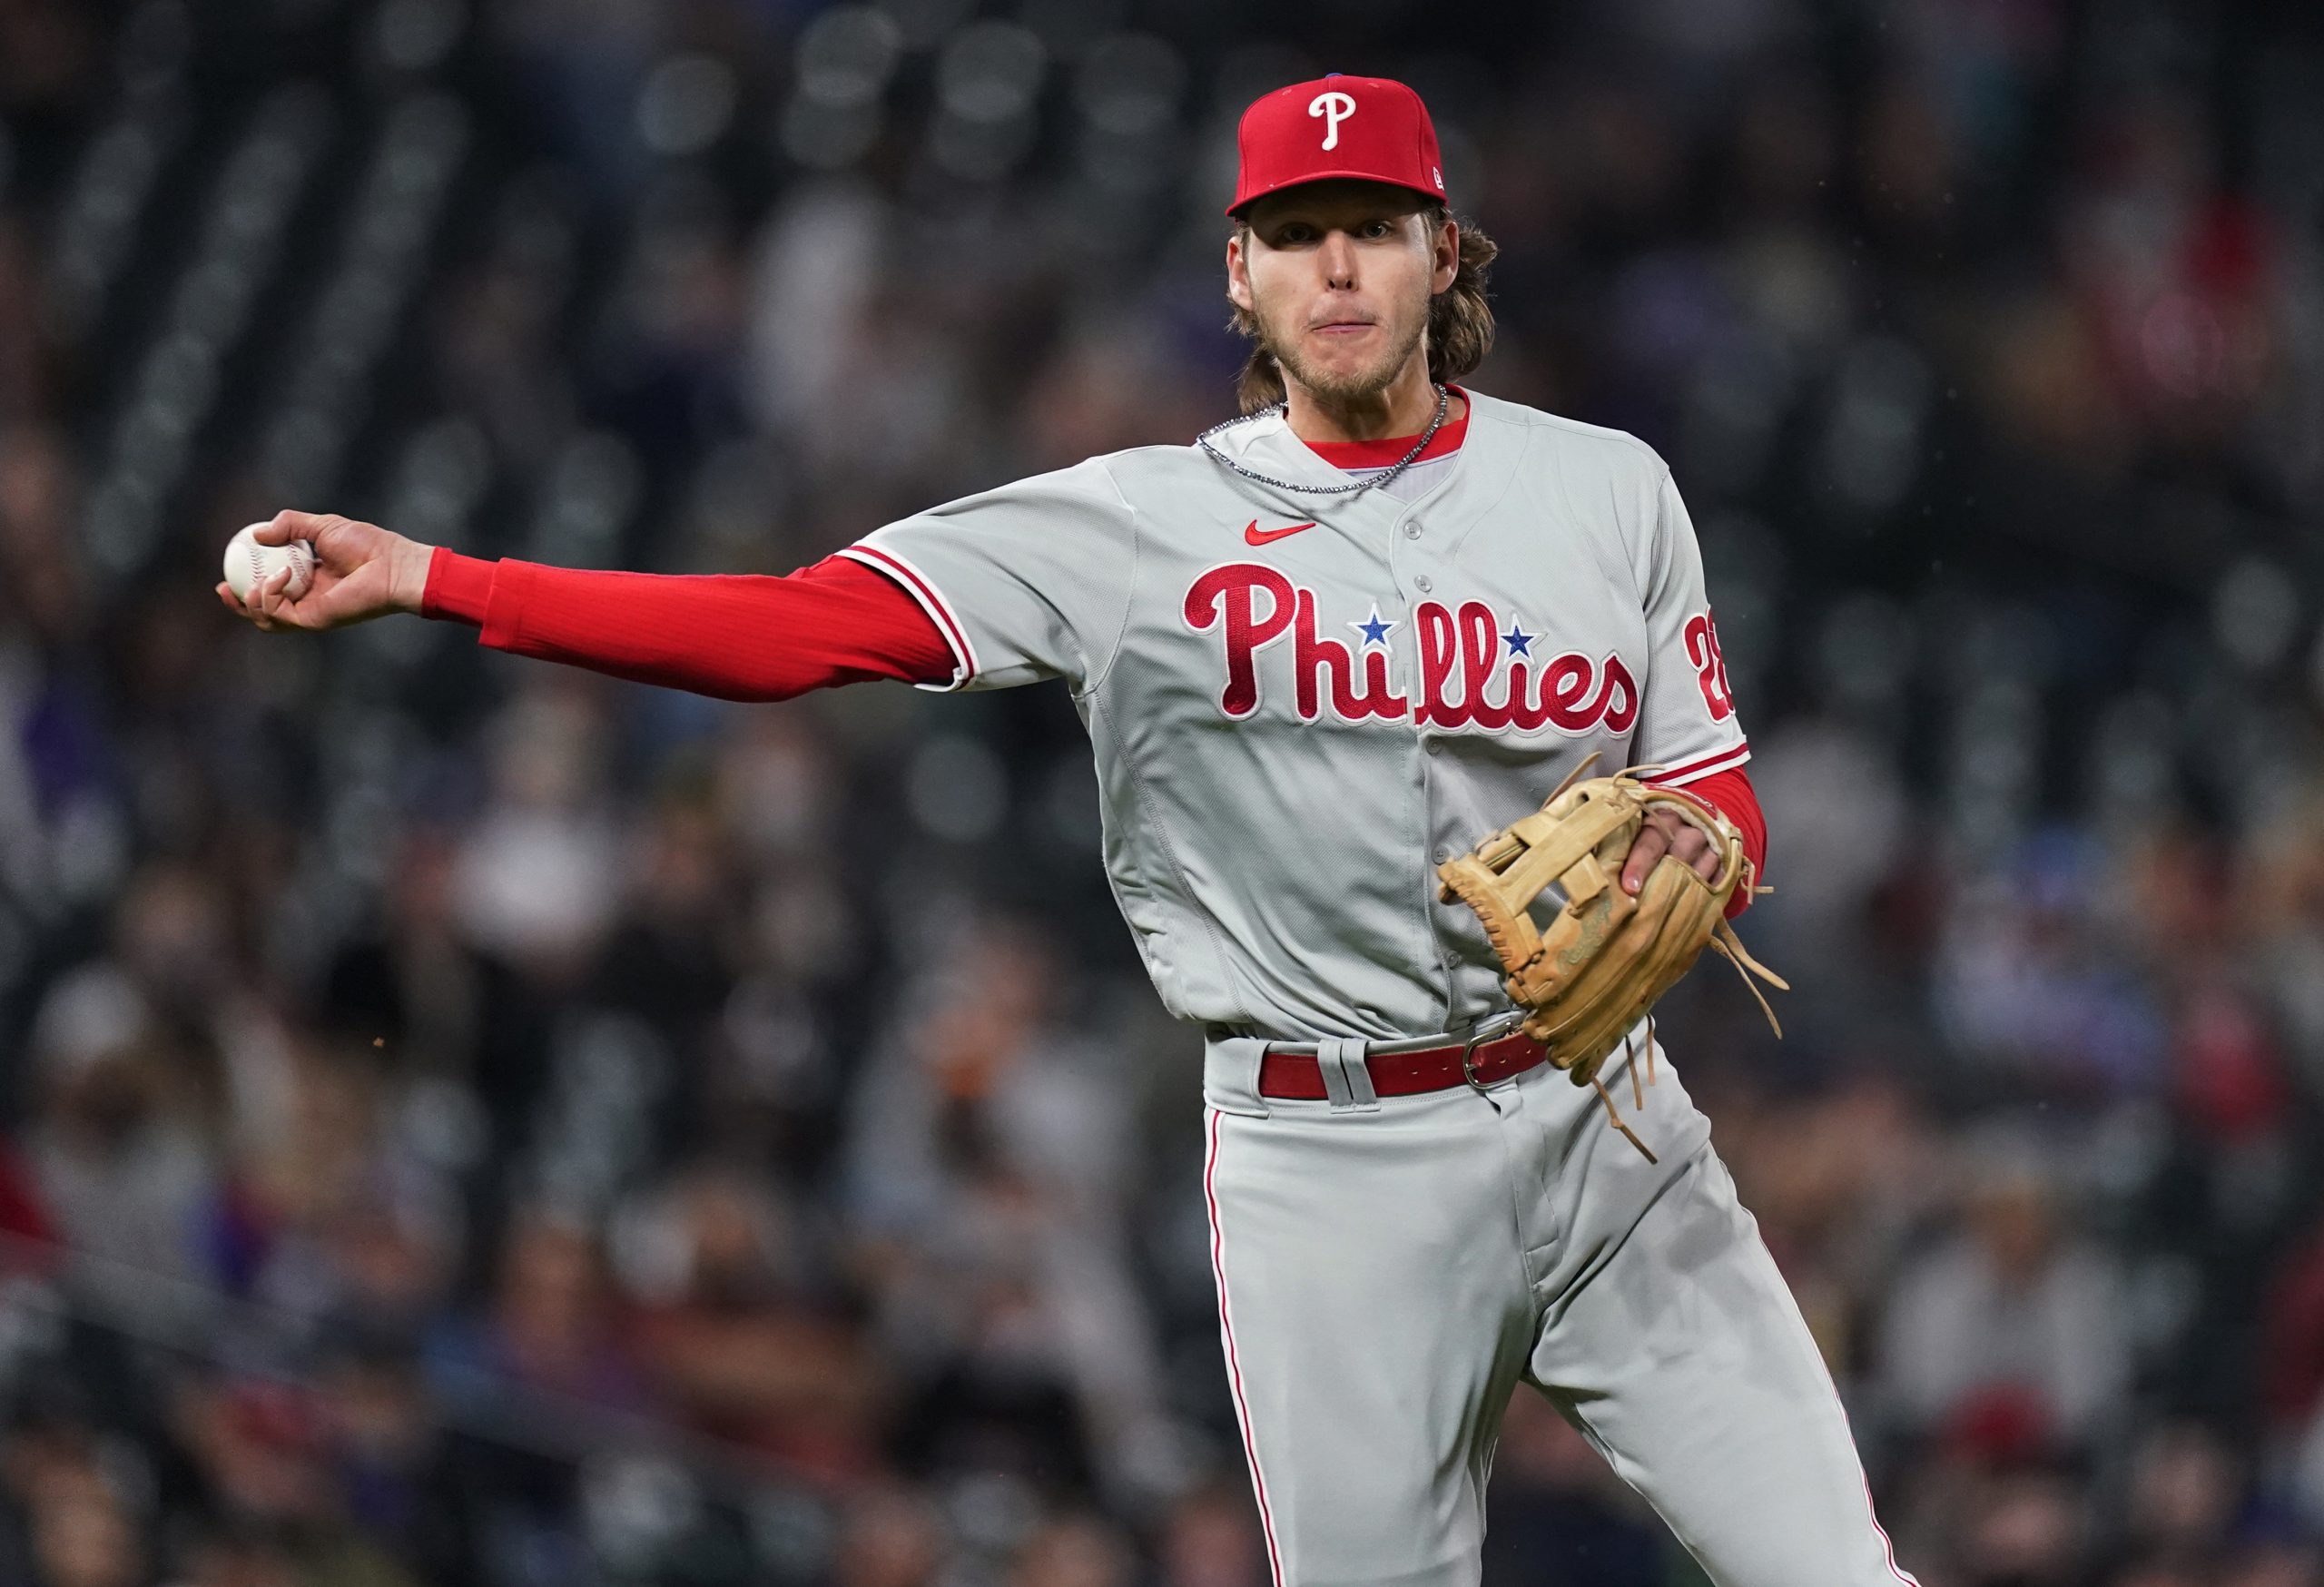 Philadelphia Phillies third baseman Alec Bohm appeared to say "I f-ing hate this place" after hearing it from fans following three early errors